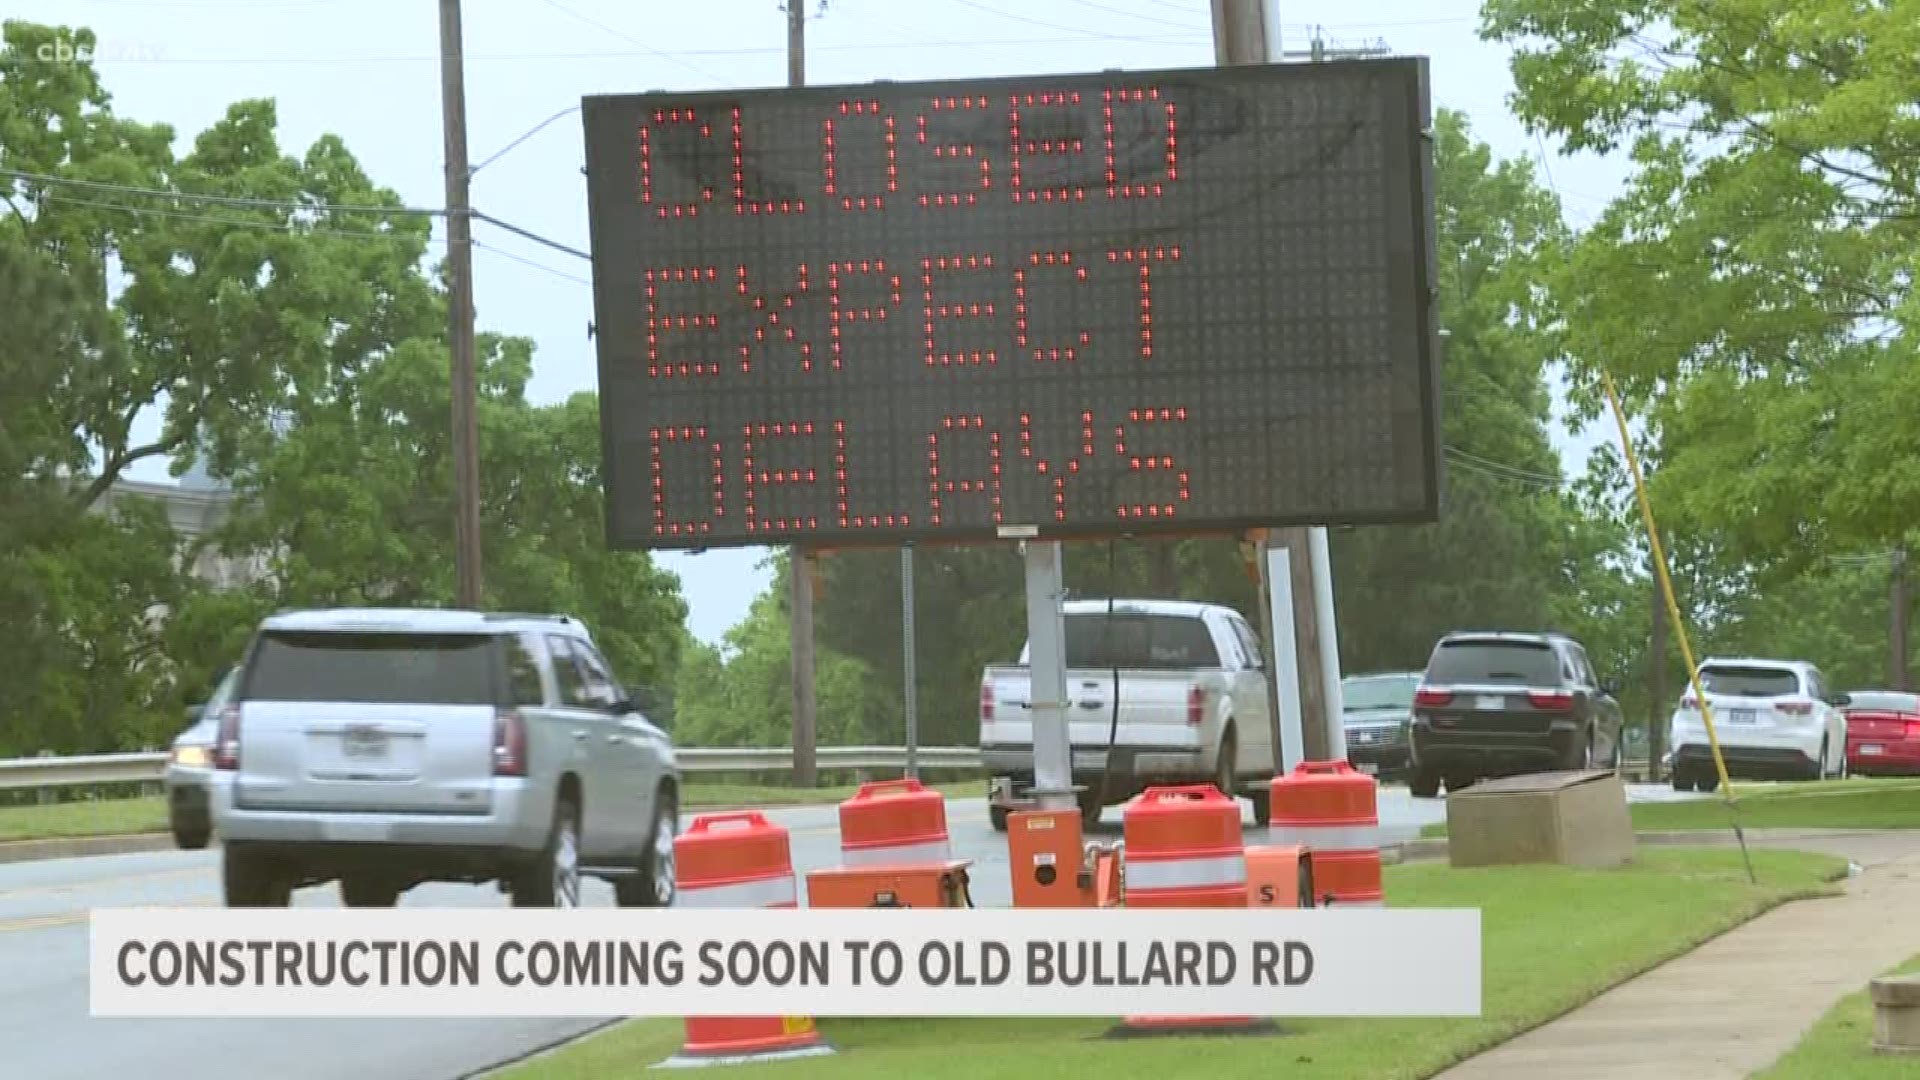 Construction will begin April 22nd on Old Bullard Road to add three more culverts to help alleviate flooding issues.